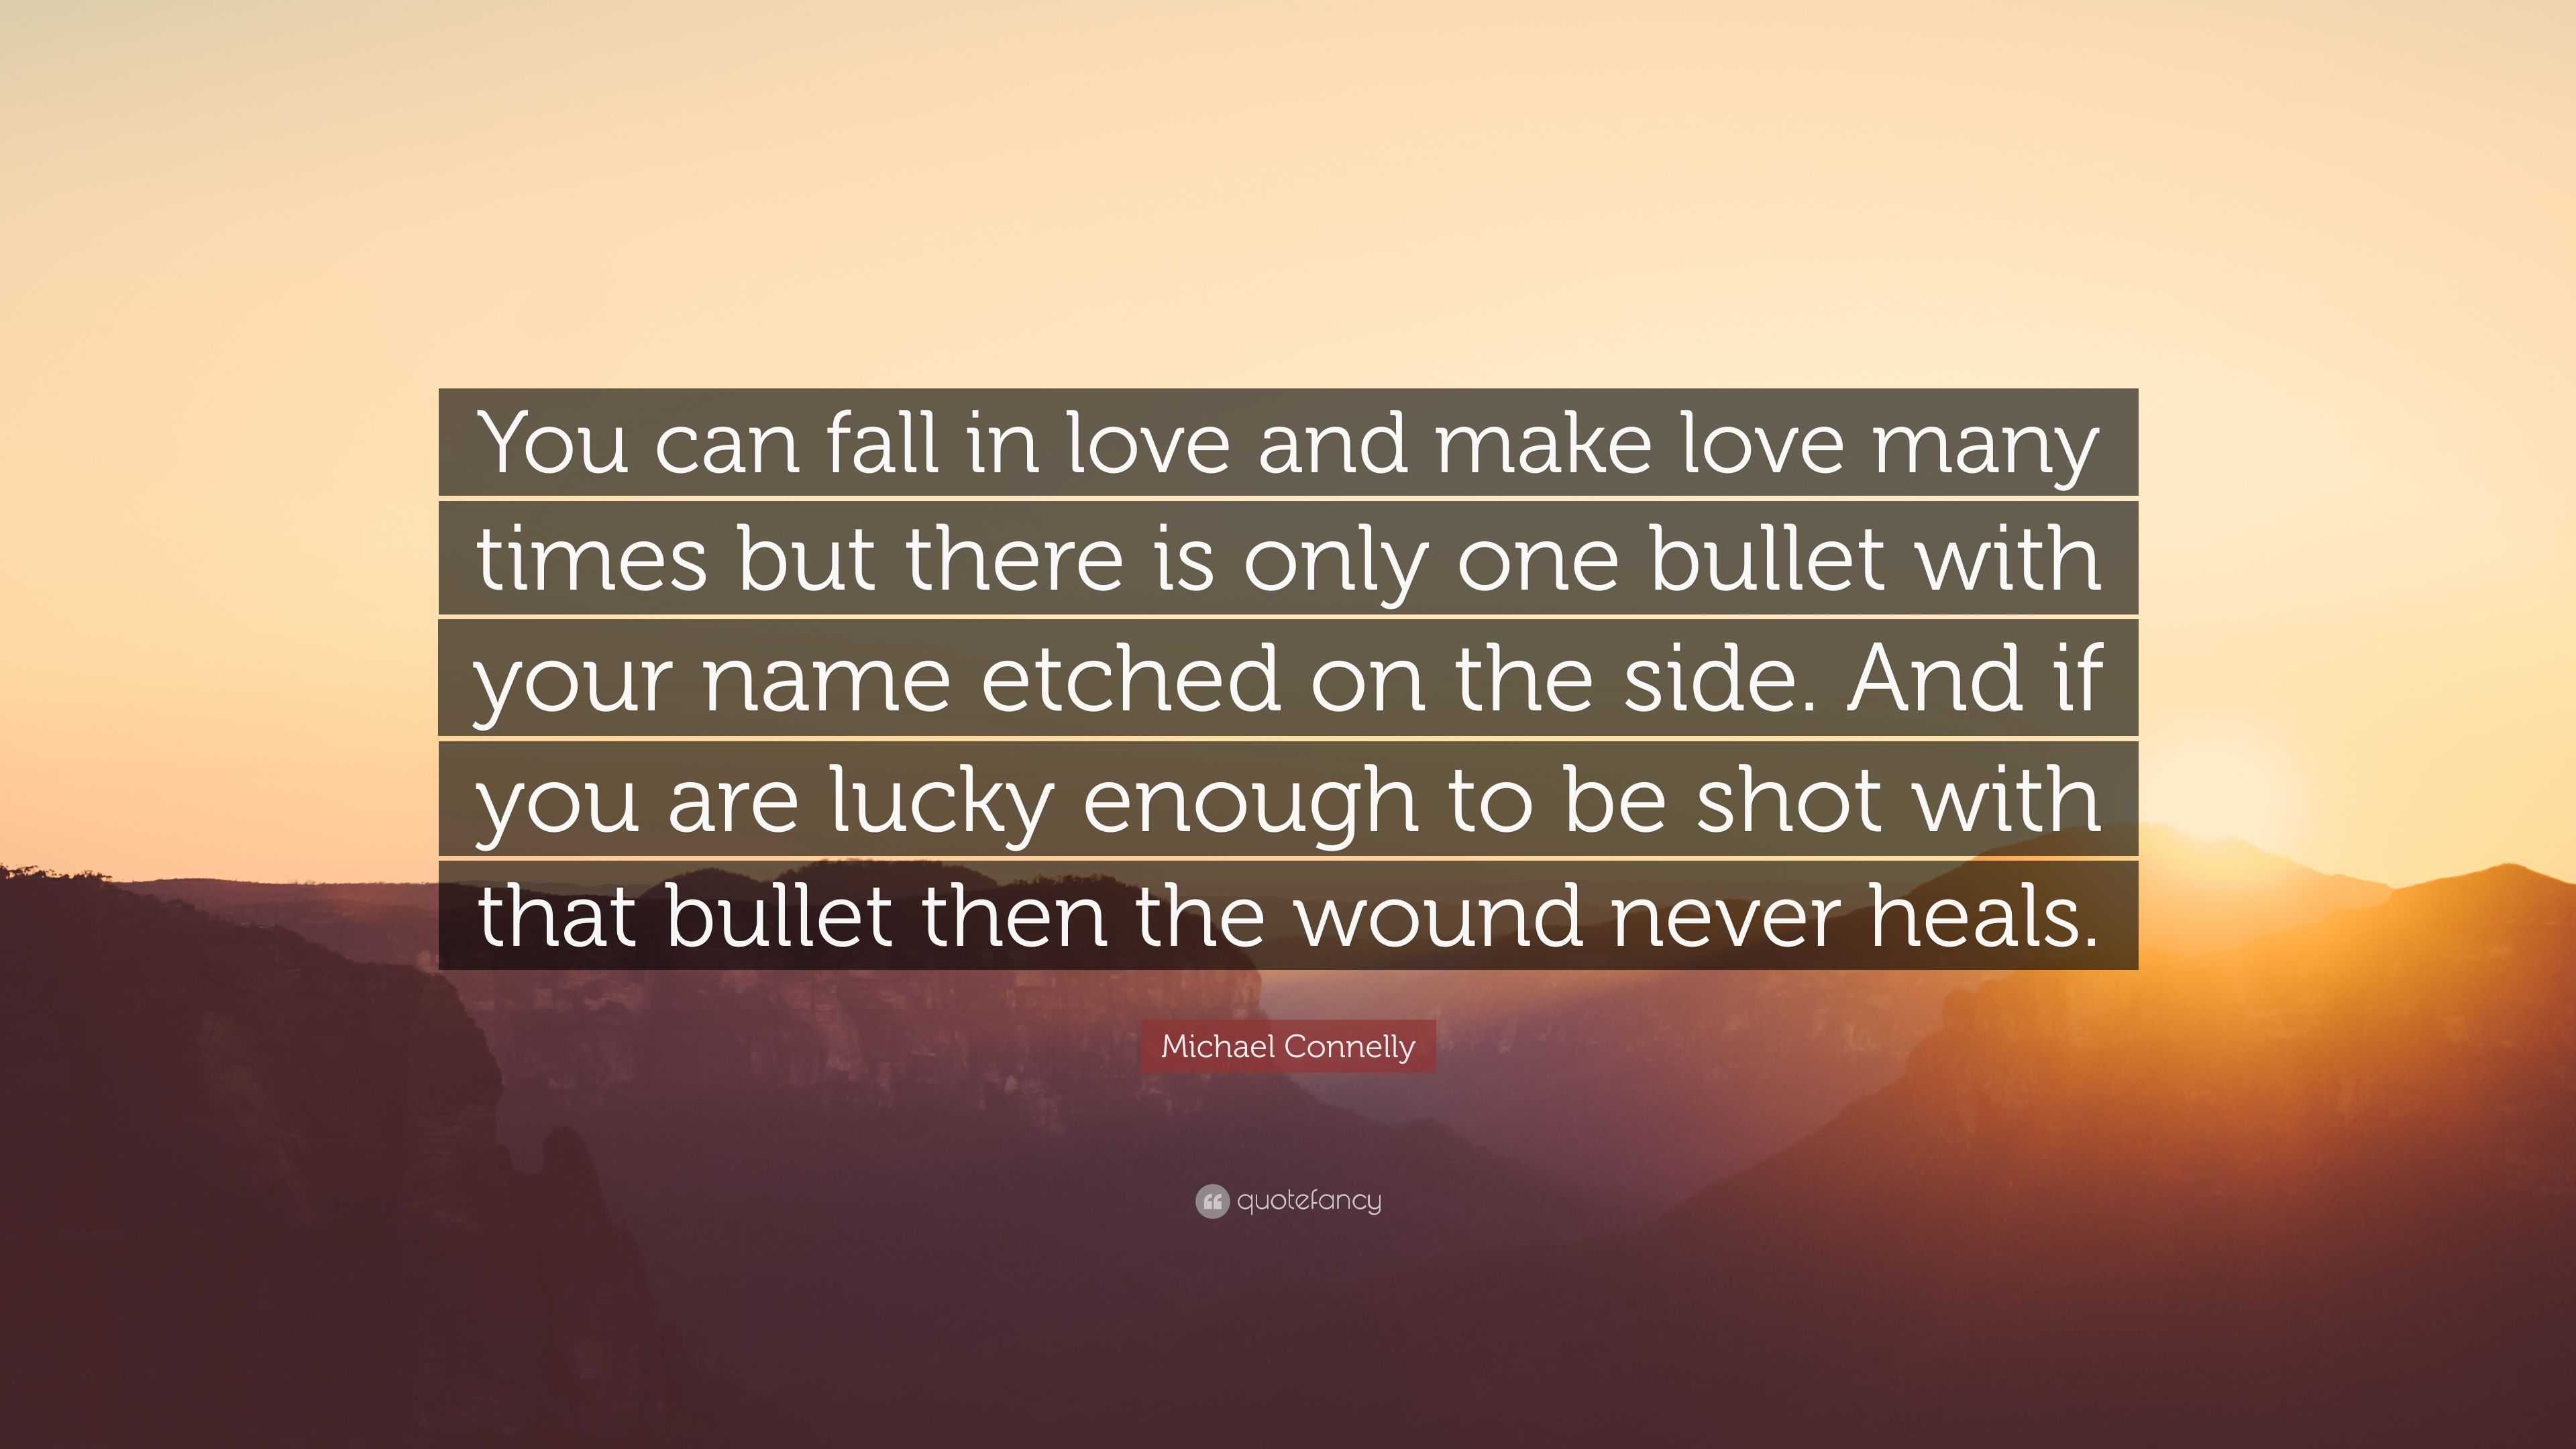 Michael Connelly Quote “You can fall in love and make love many times but